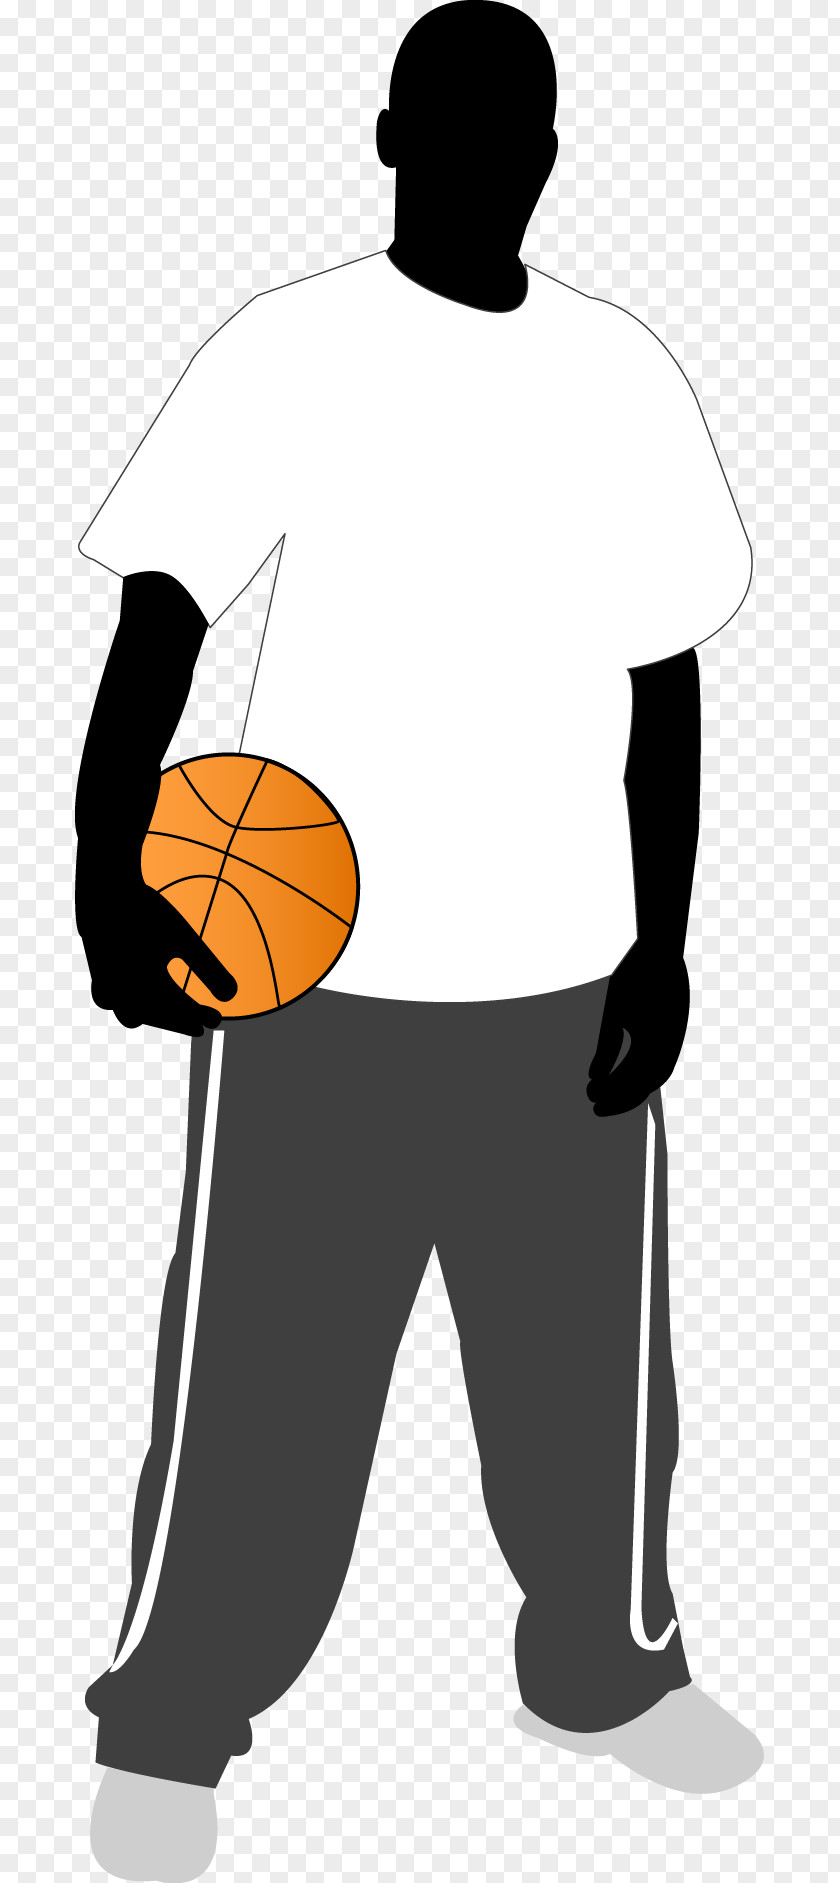 The Man With Basketball PNG